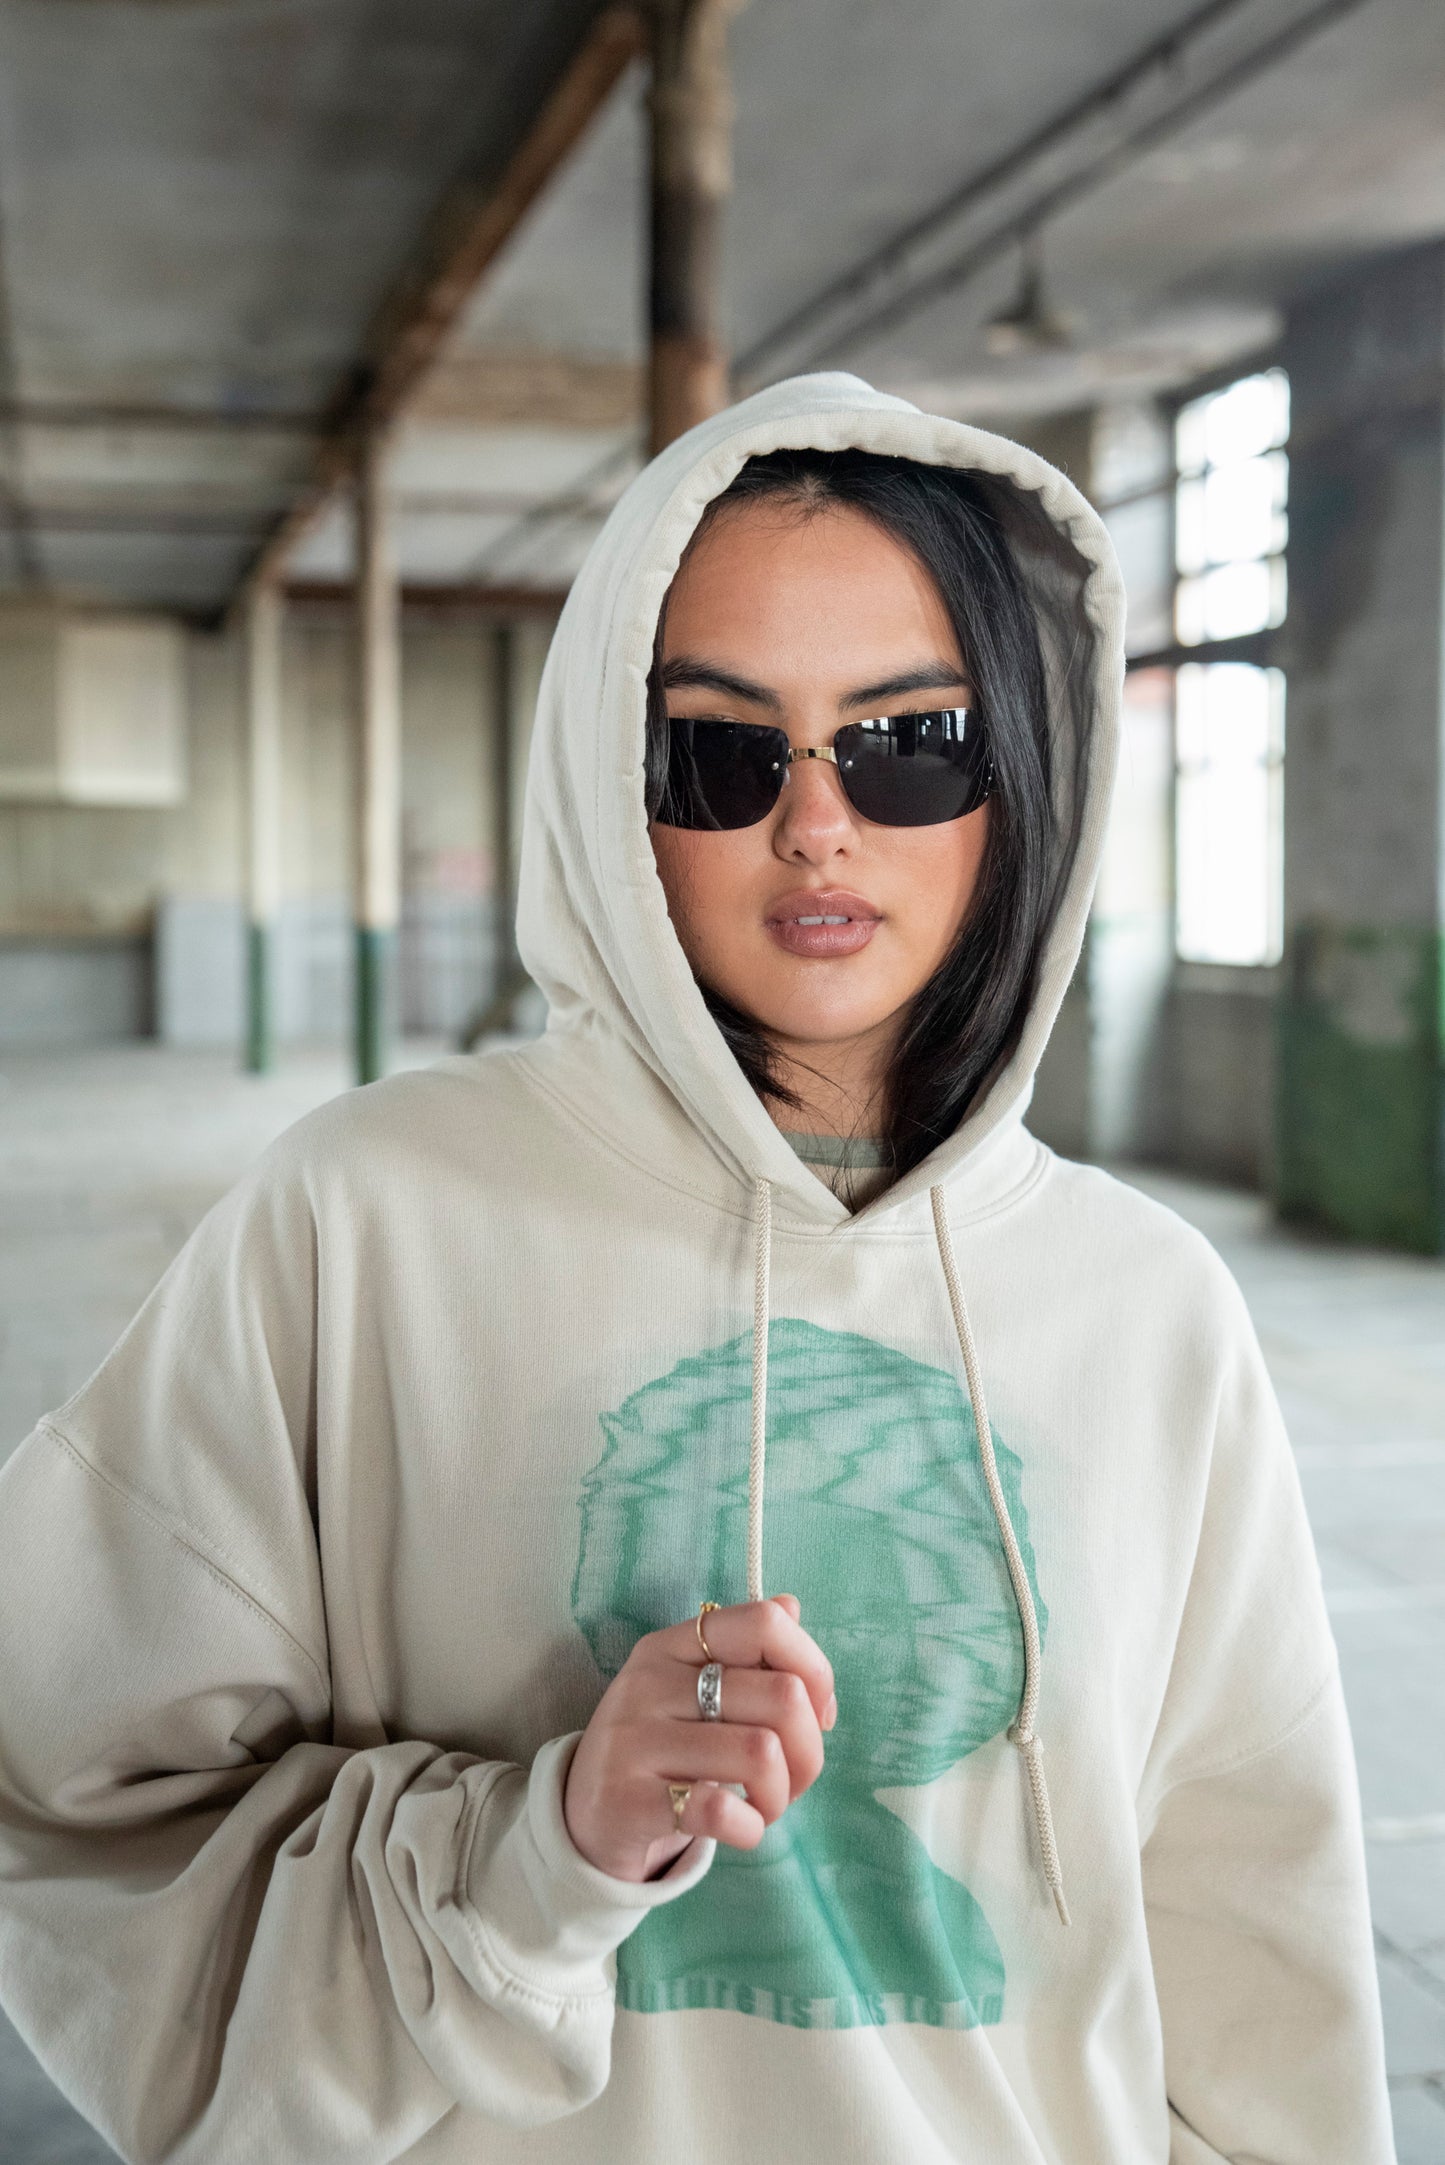 Hoodie in Sand with The Future Is Ours To Dream Print